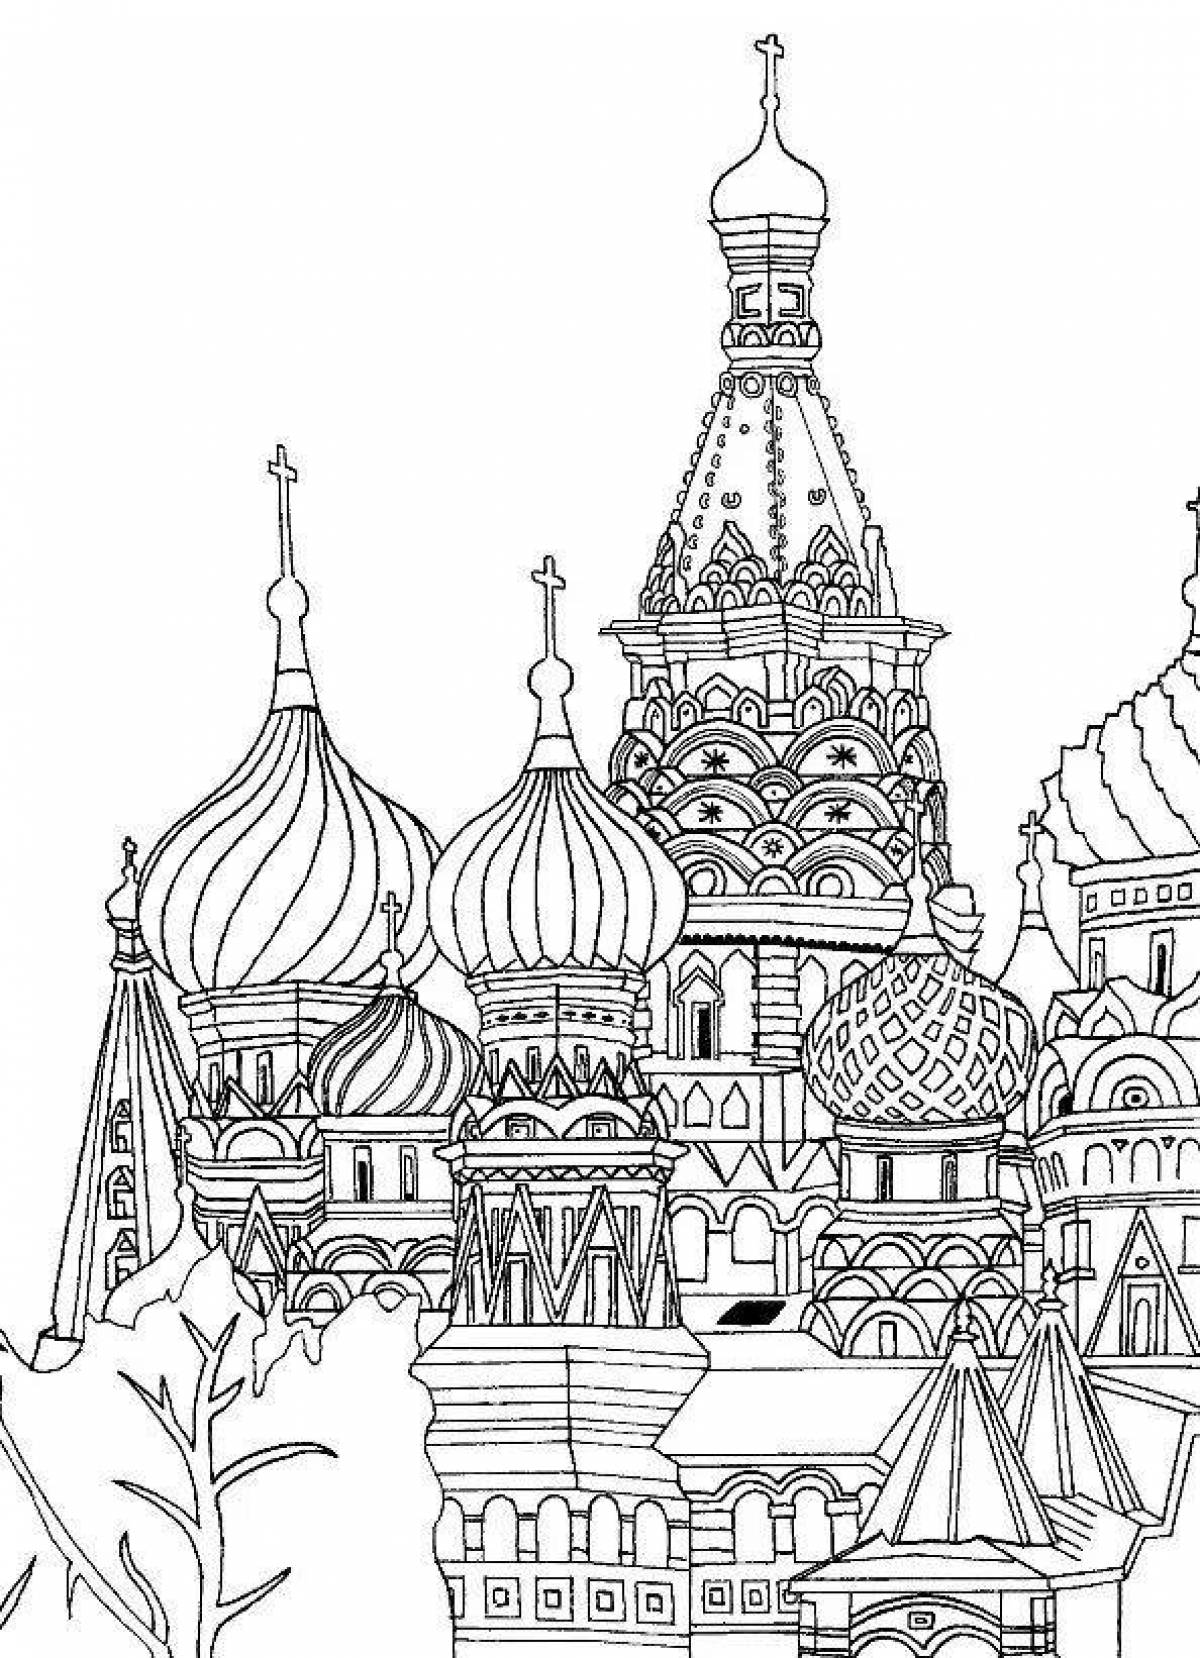 Coloring page exquisite st basil's church